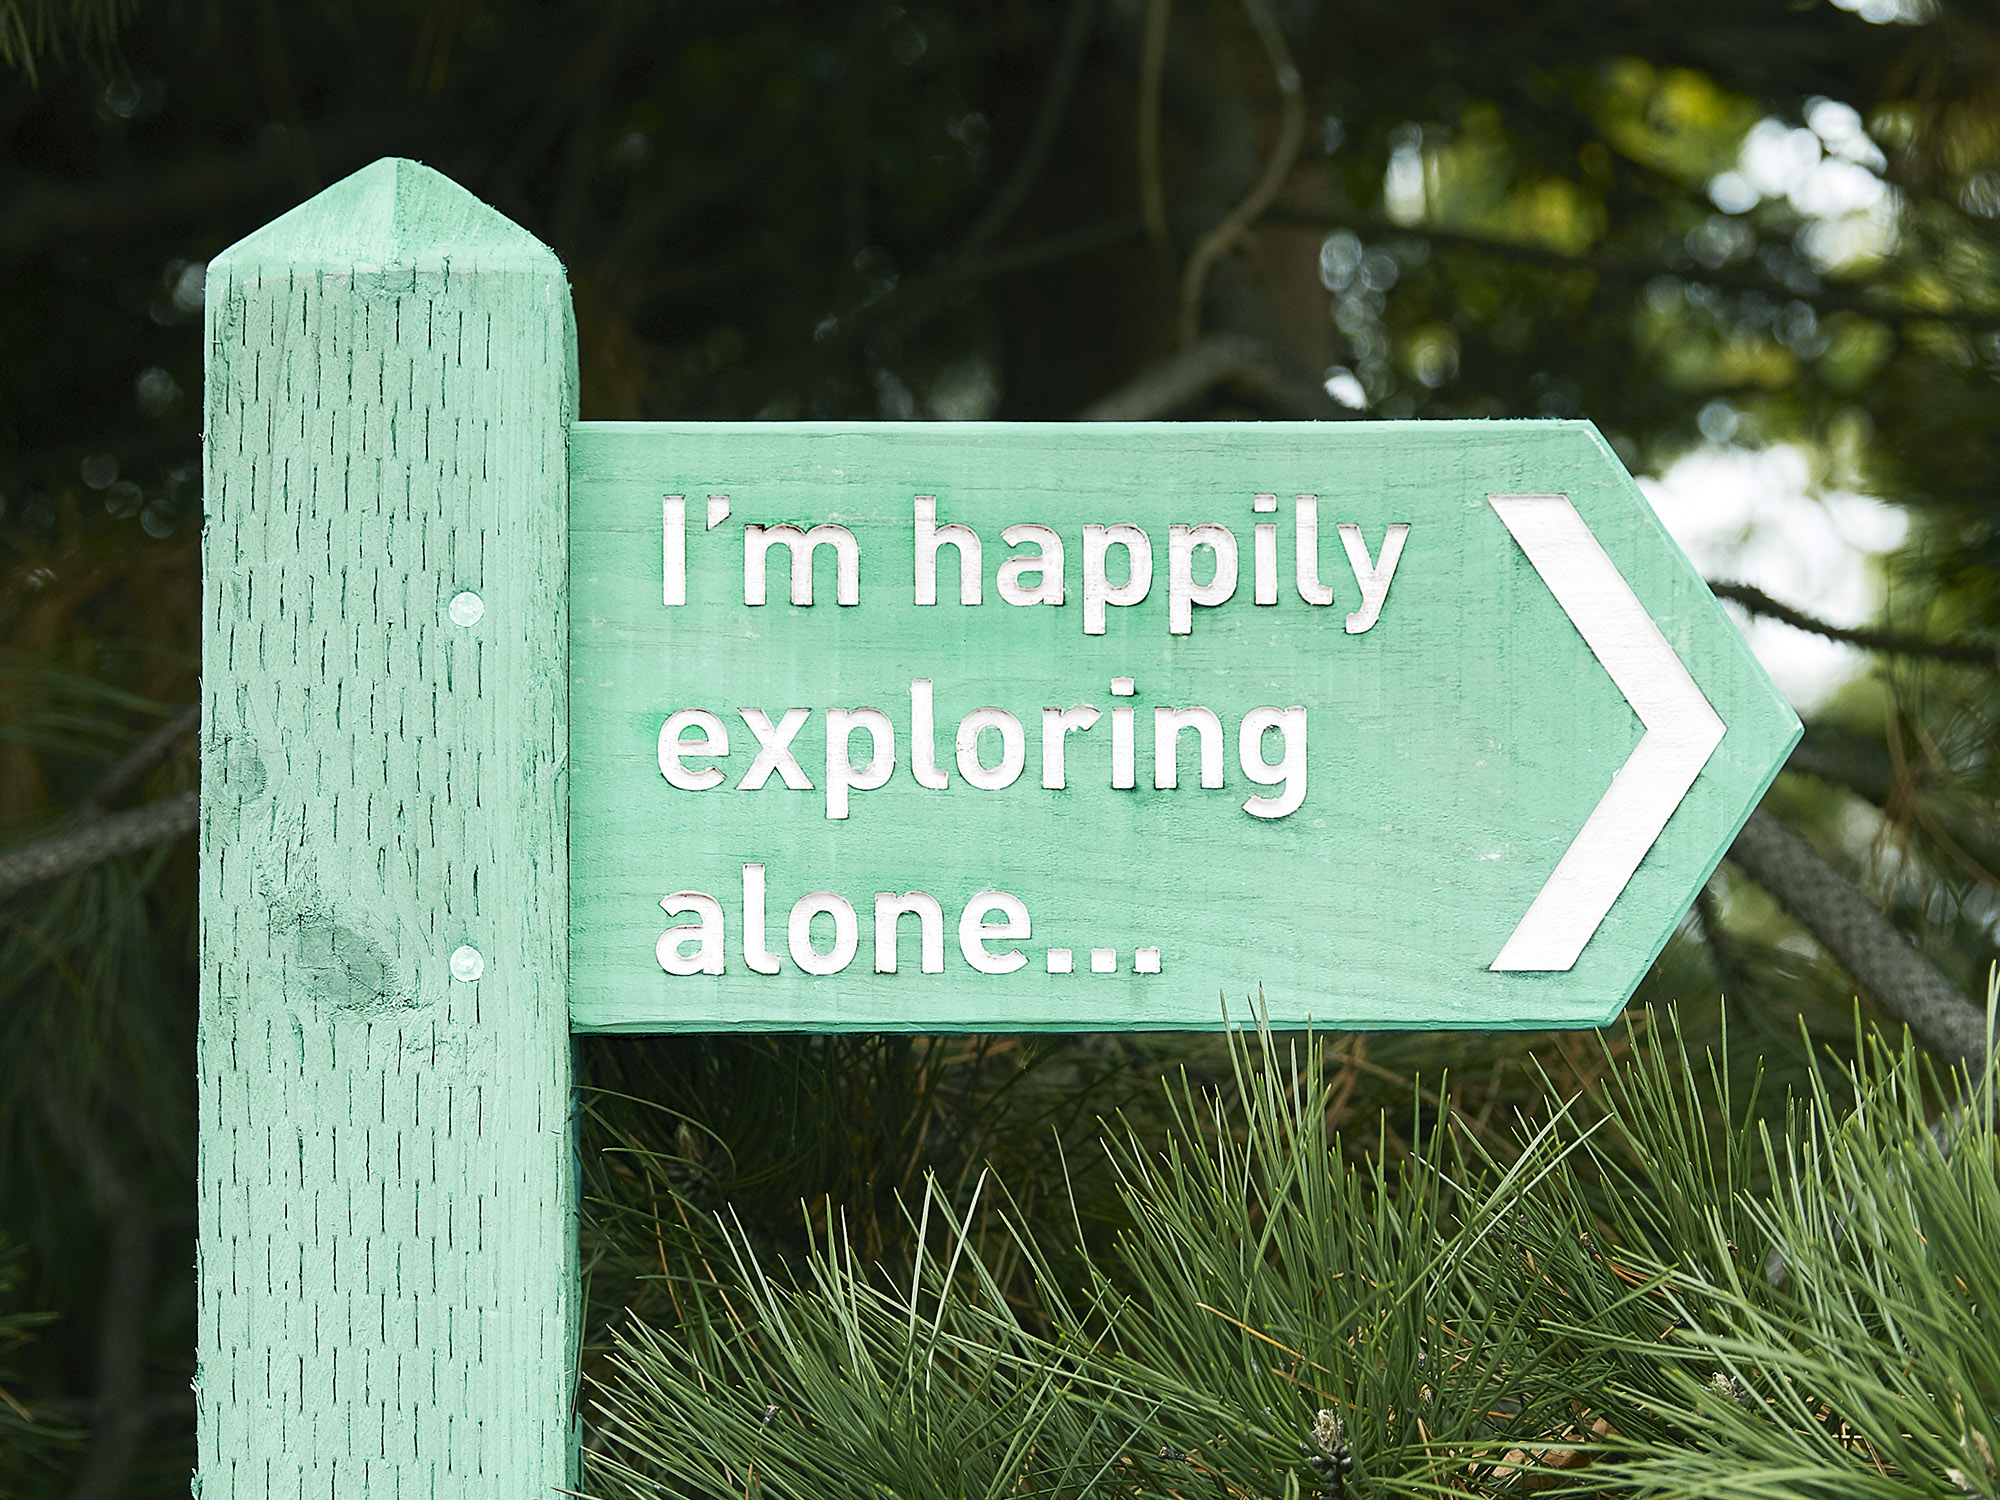 Perspective: I'm happily exploring alone.